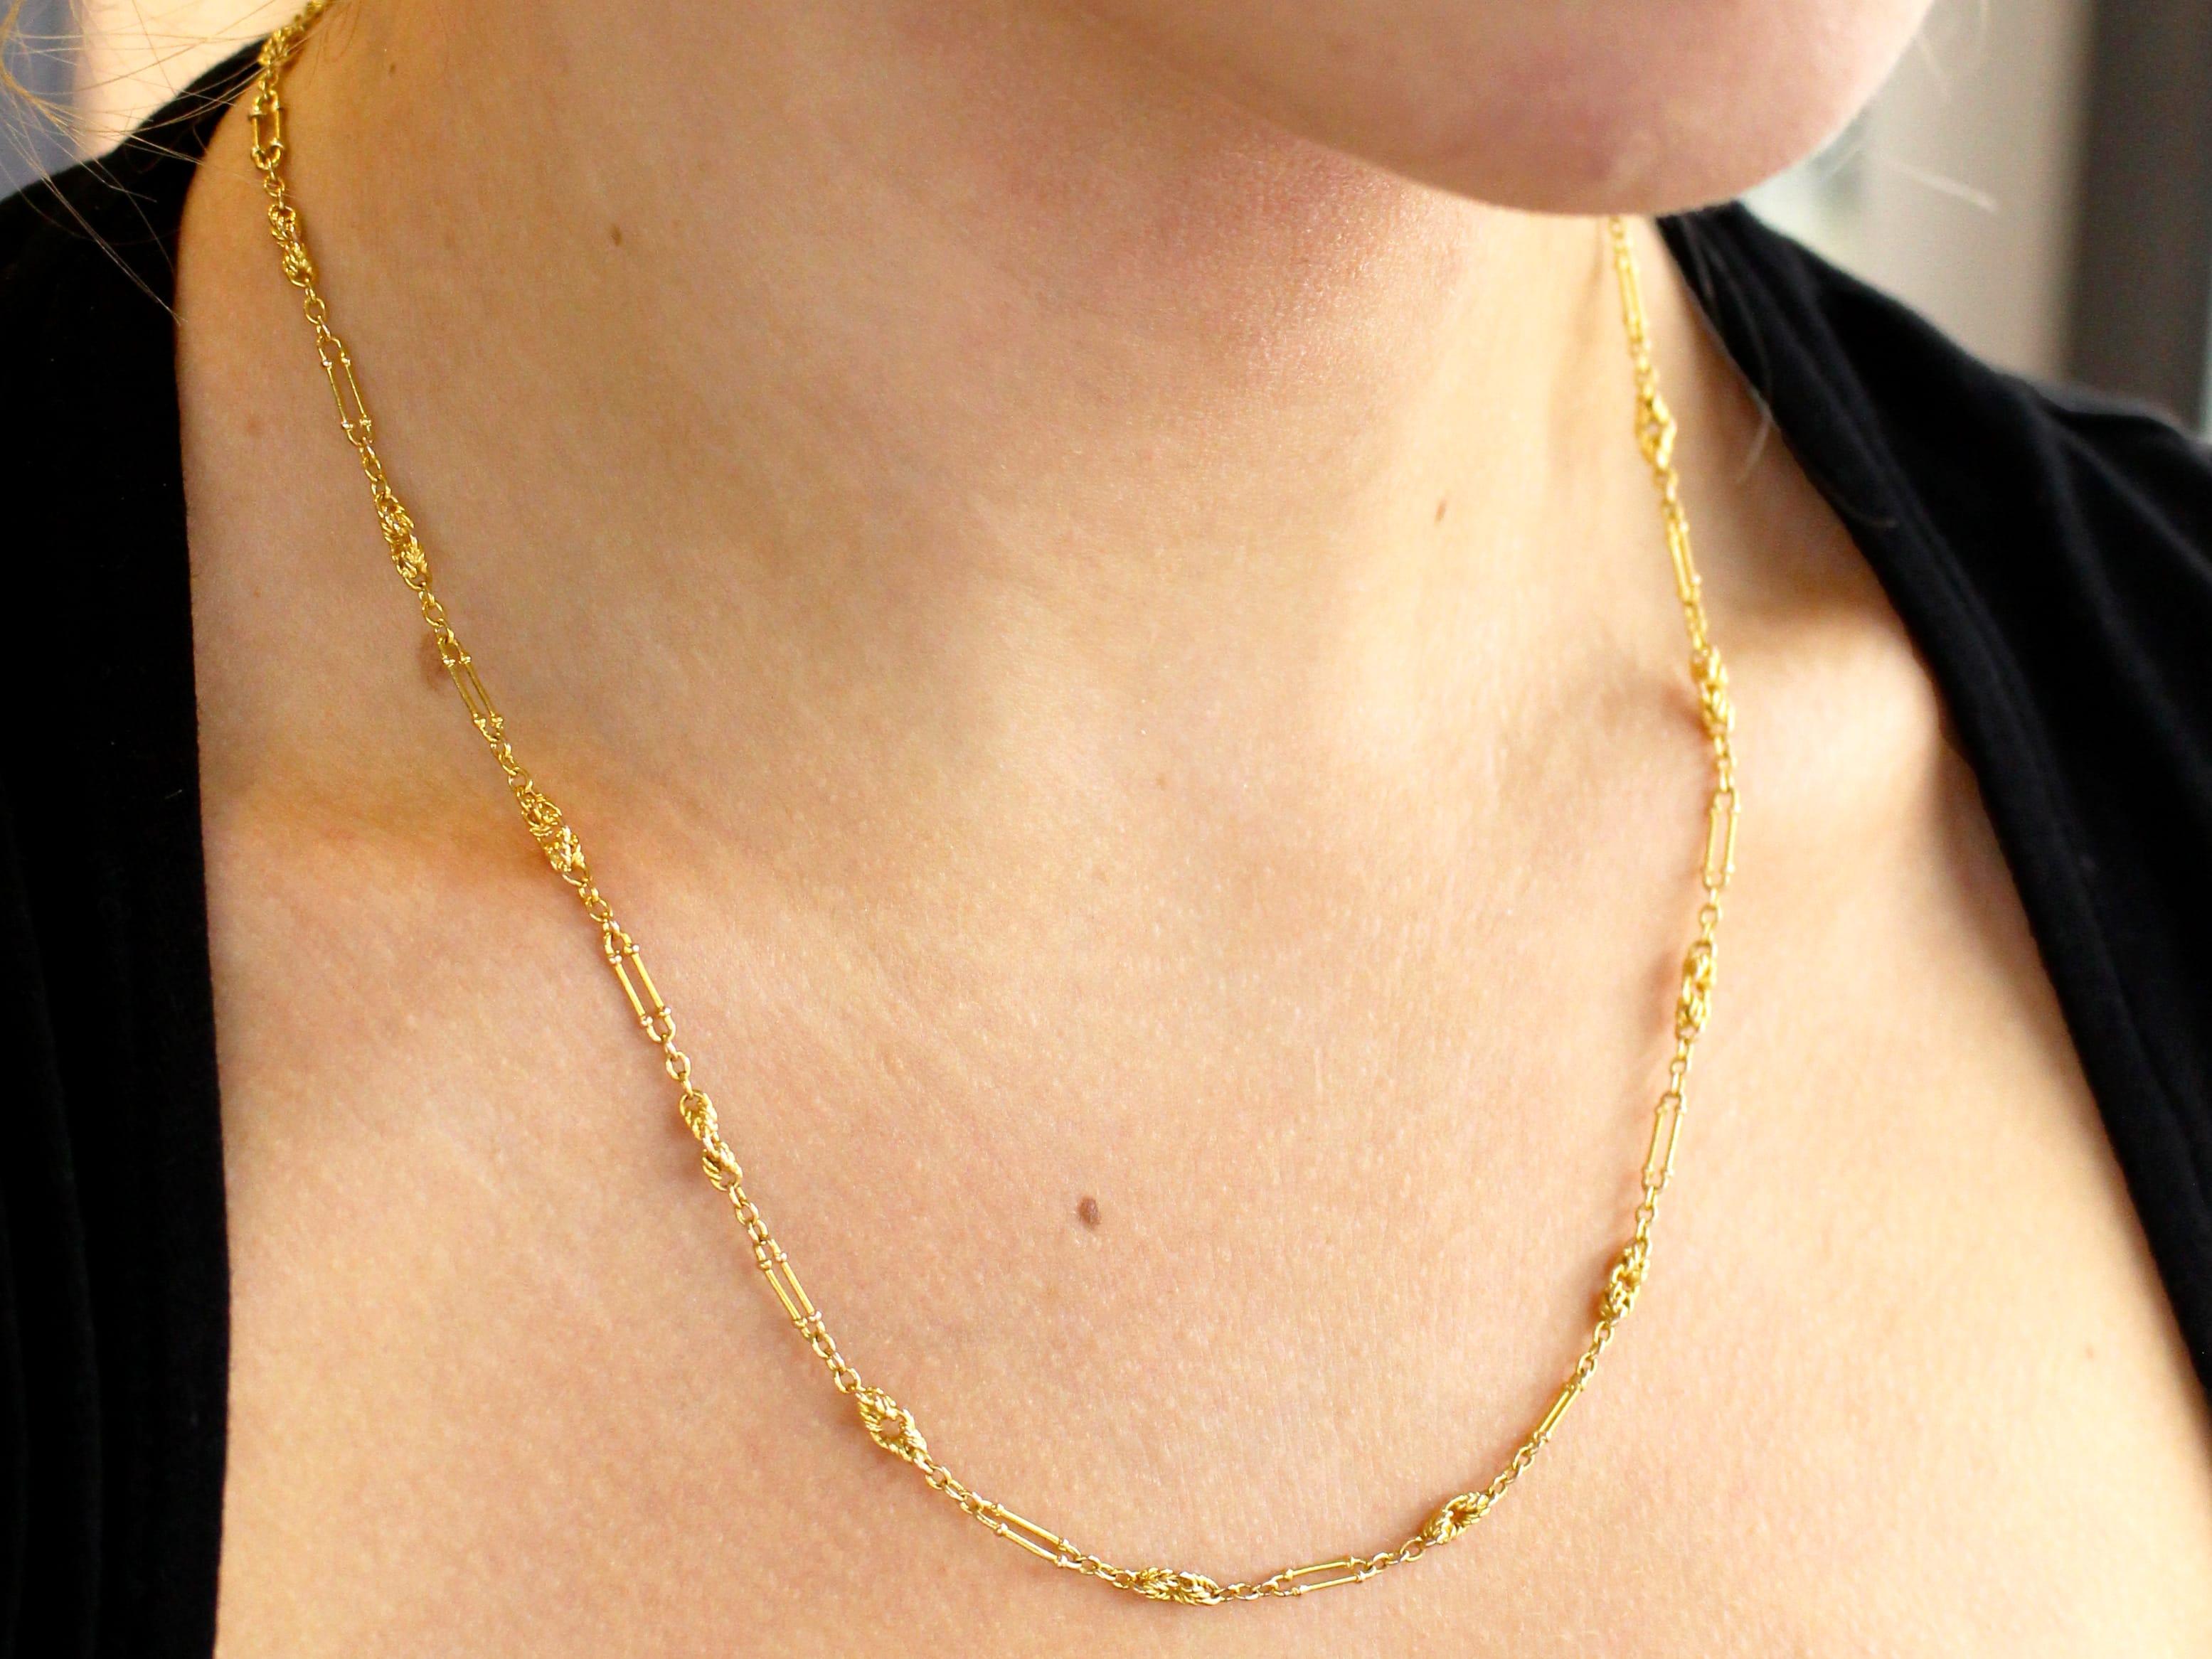 An exceptional, fine and impressive, antique 14 karat yellow gold chain; part of our diverse antique chain collection

This exceptional, fine and impressive antique necklace chain has been crafted in 14k yellow gold.

The fetter style antique gold